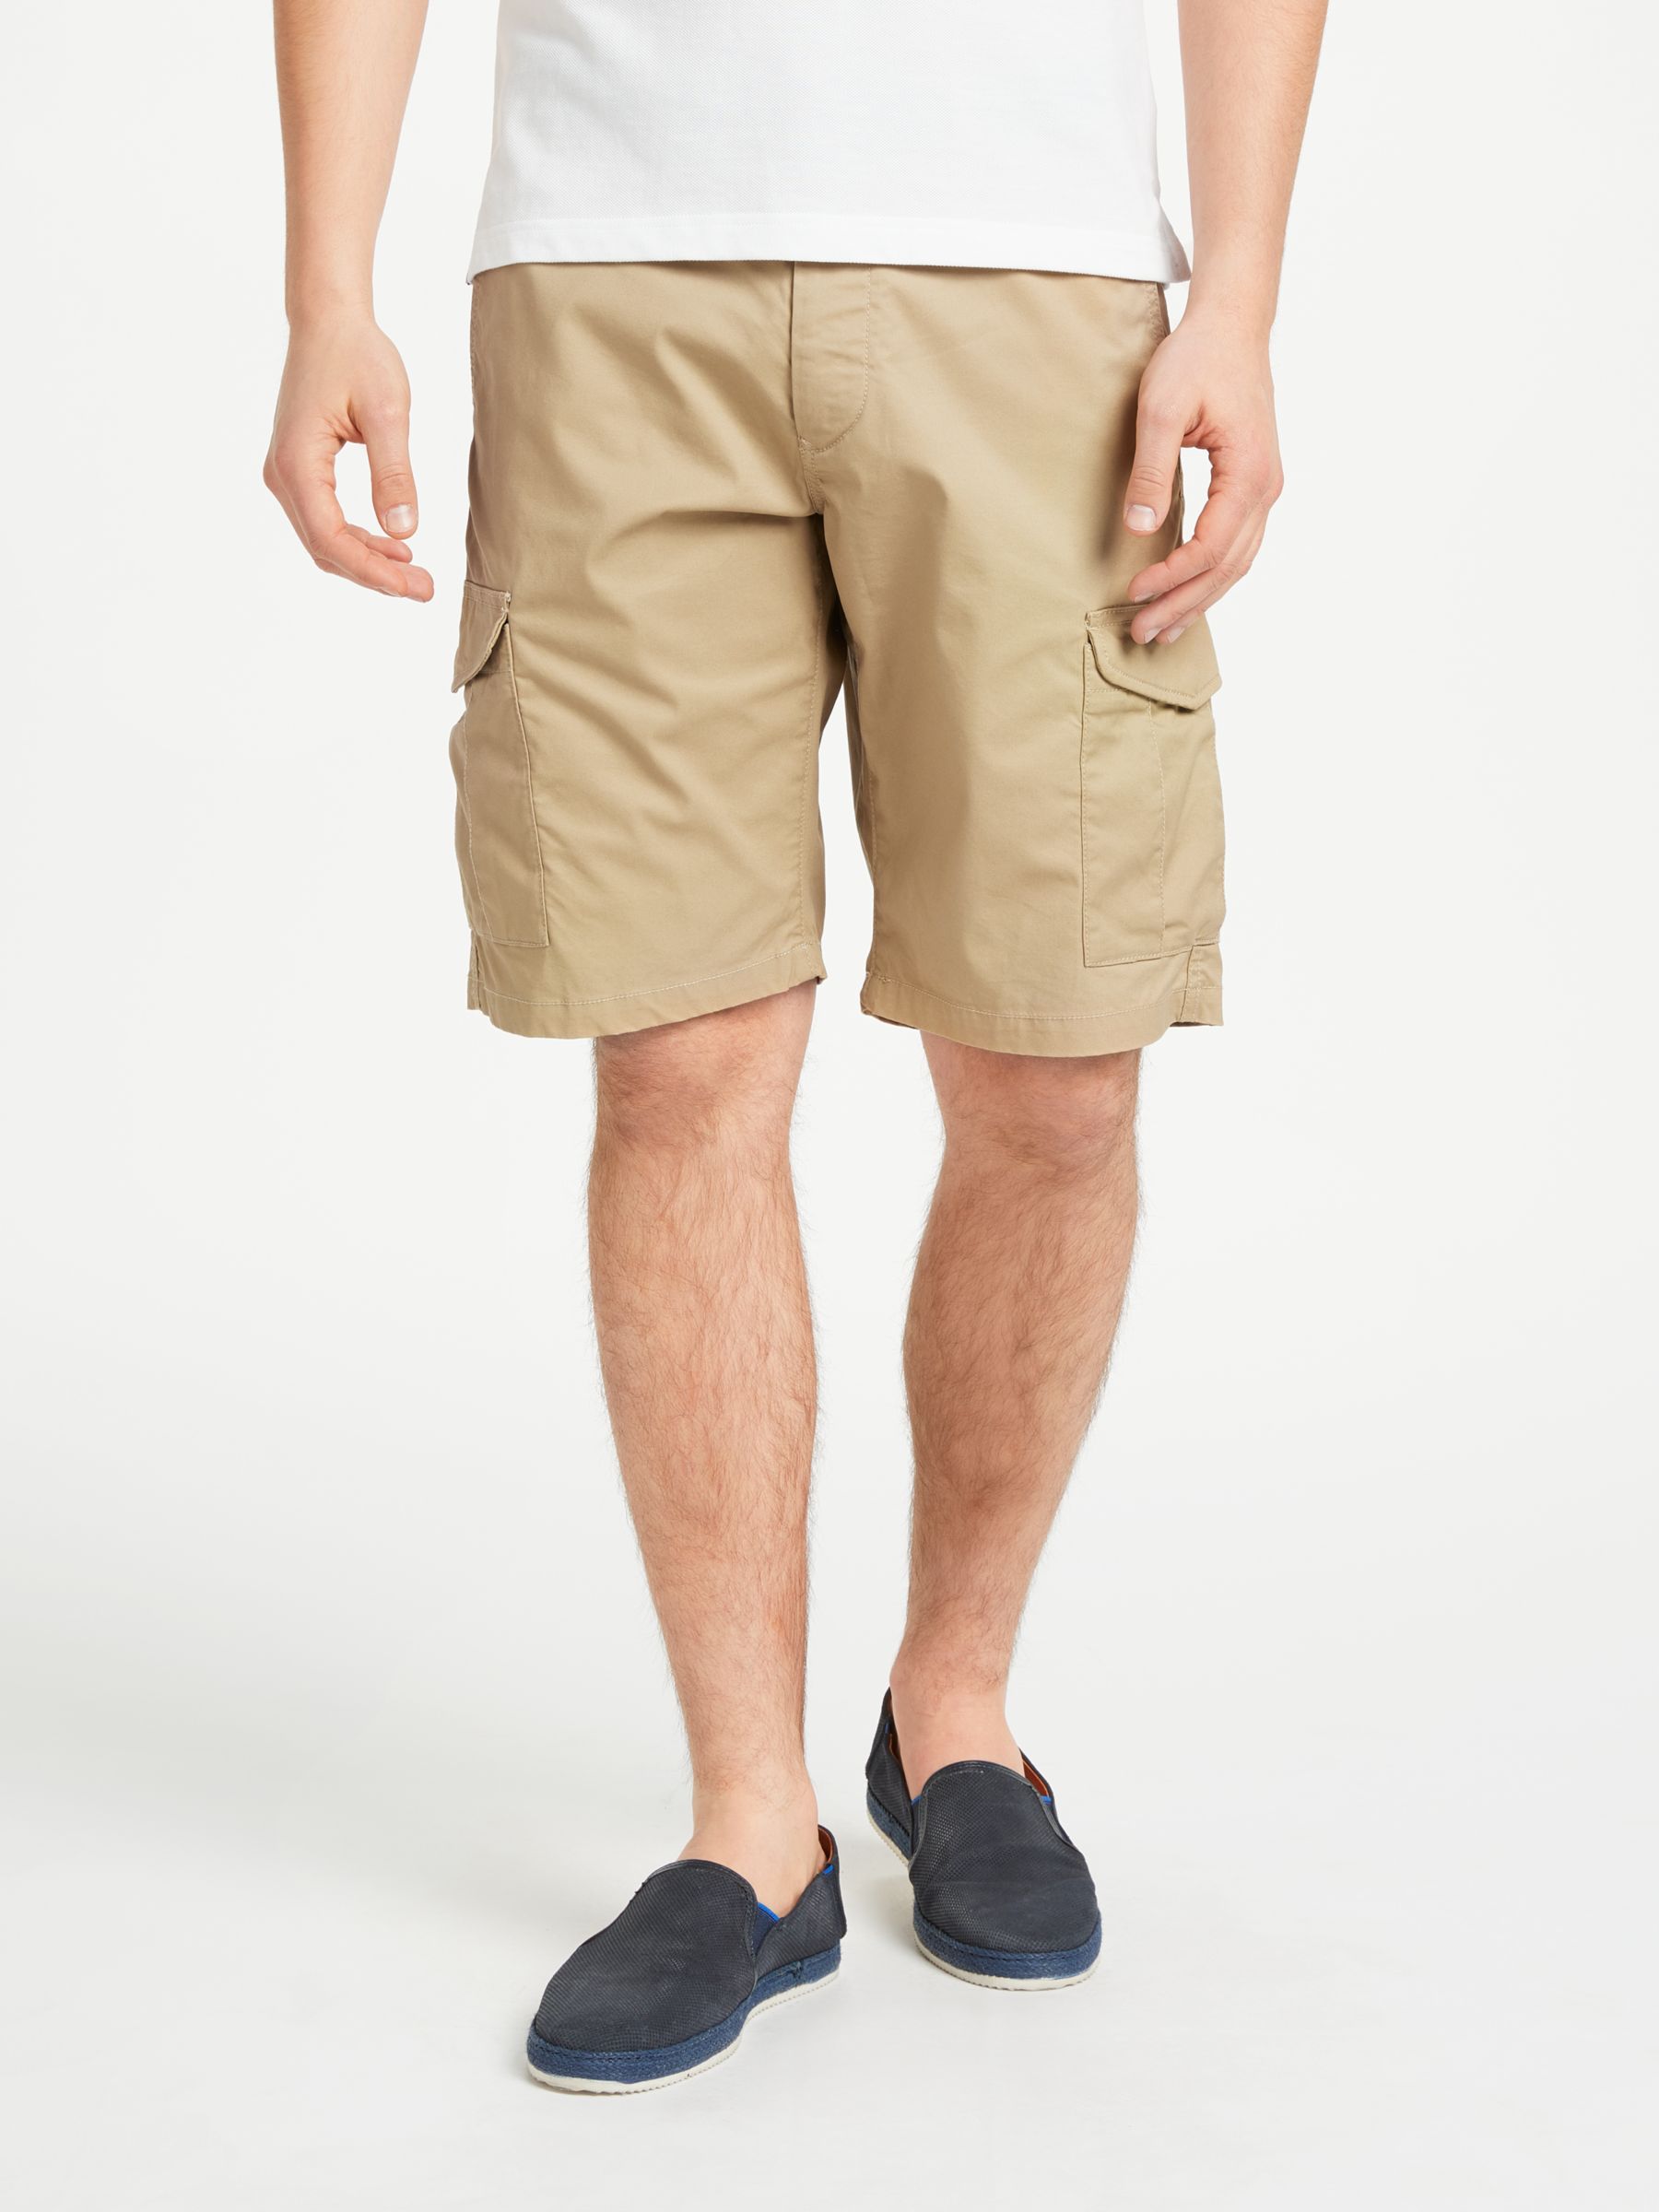 Gant Relaxed Belted Cargo Shorts, Stone, 30R